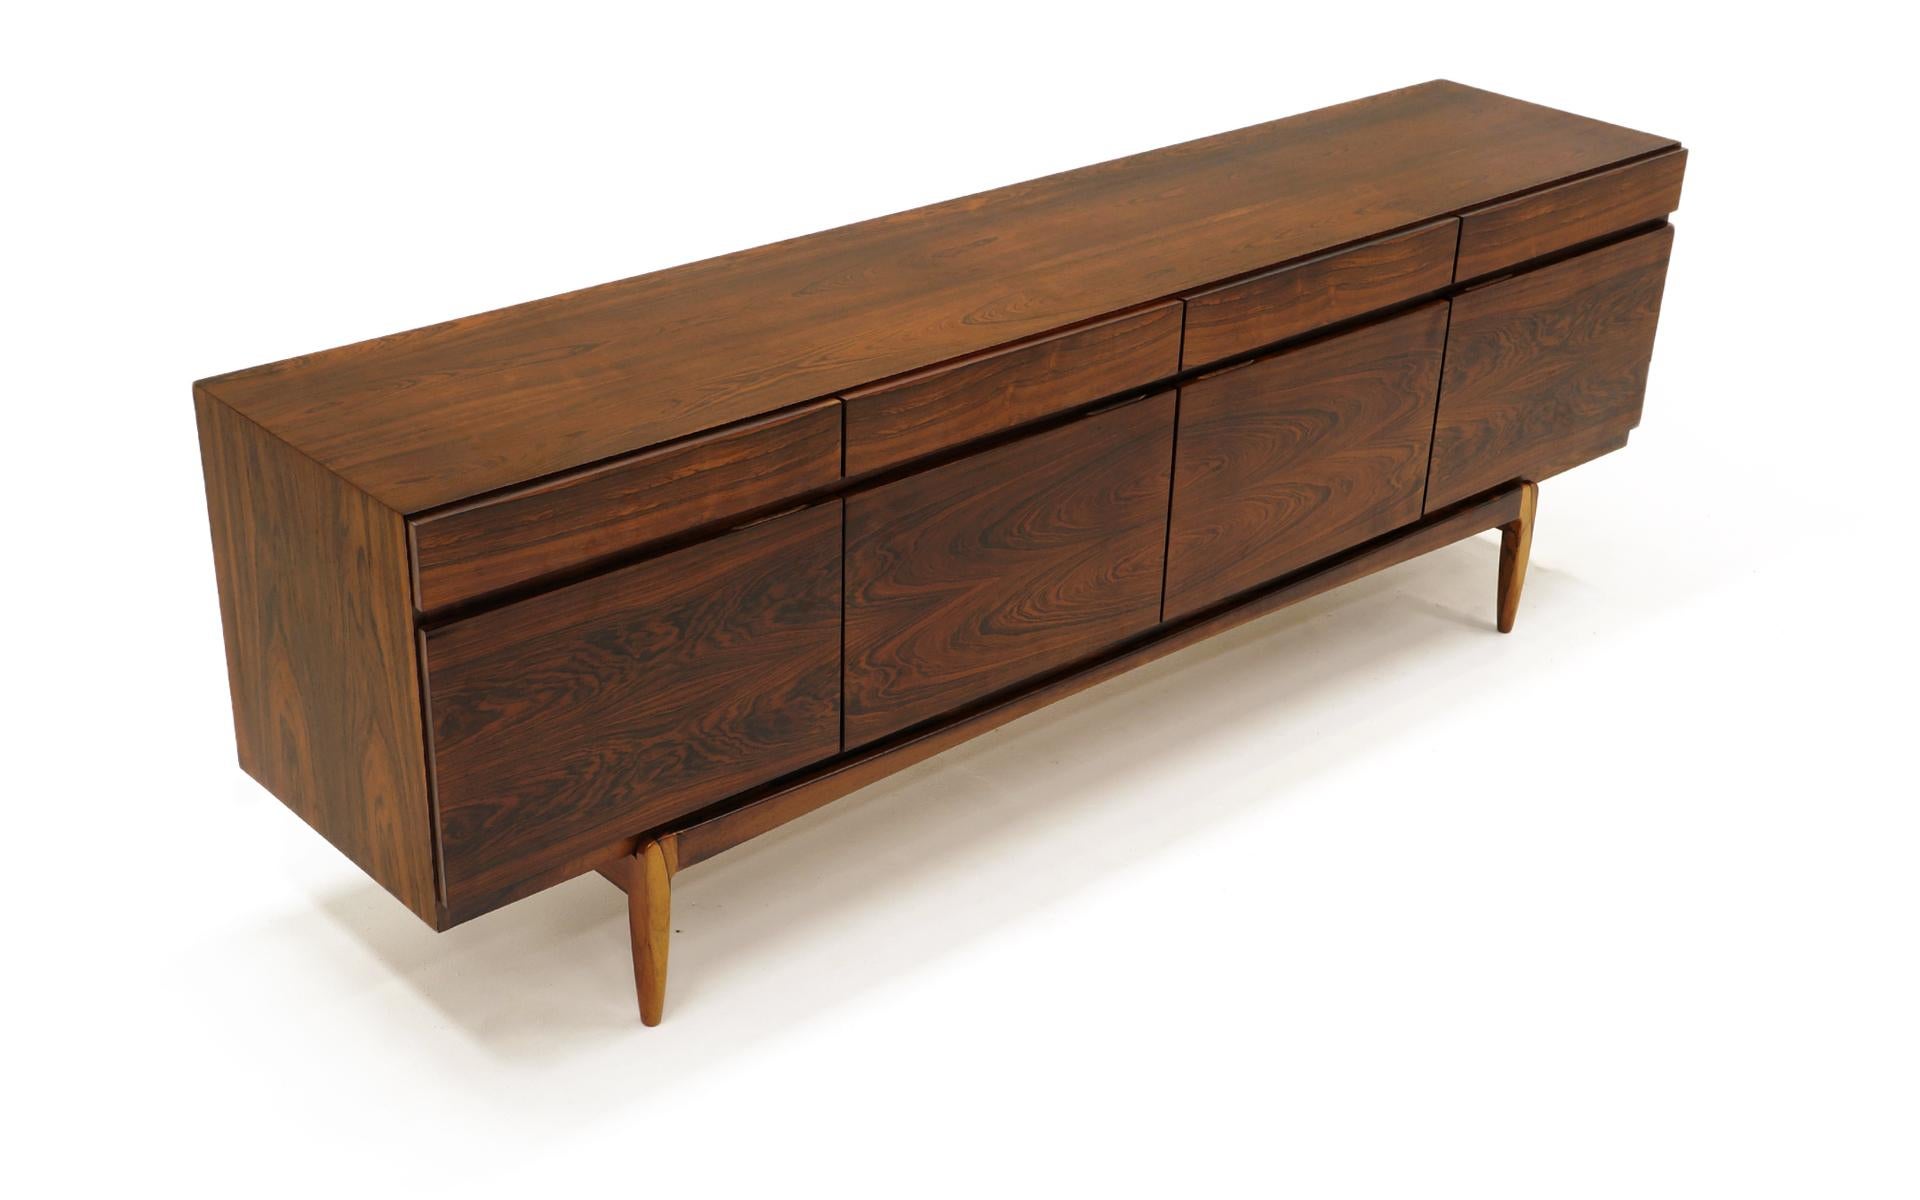 Stunning Danish Modern Kofod Larsen for Faarup Møbelfabrik sideboard or credenza model FA66 in Brazilian rosewood. Excellent design with four doors and four drawers directly above those. The inside contains two shelves and one drawer unit featuring